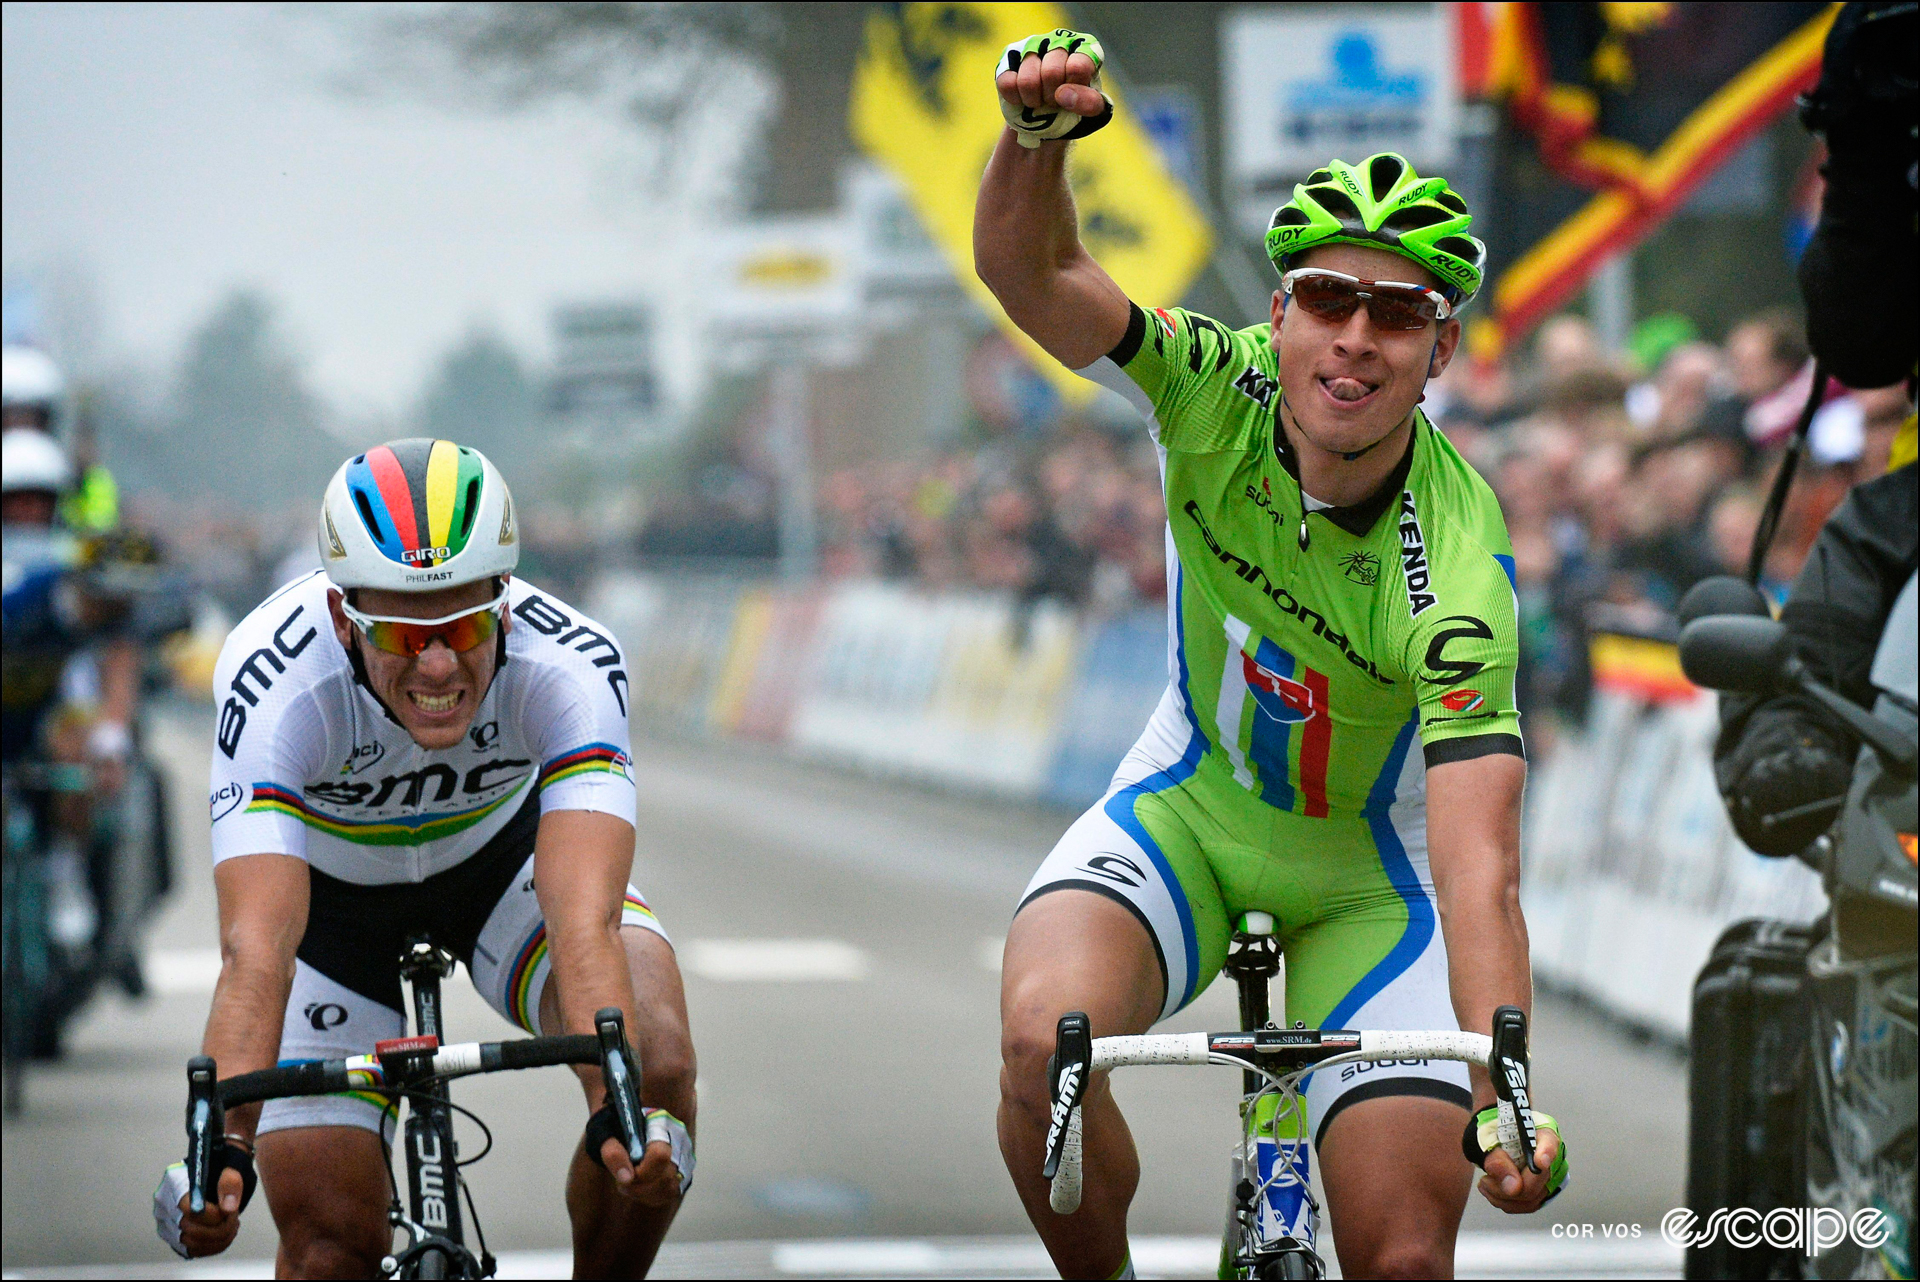 Peter Sagan celebrates winning the 2013 Brabantse Pijl with his tongue out, one fist in the air, and world champ Philippe Gilbert grimacing in the background.